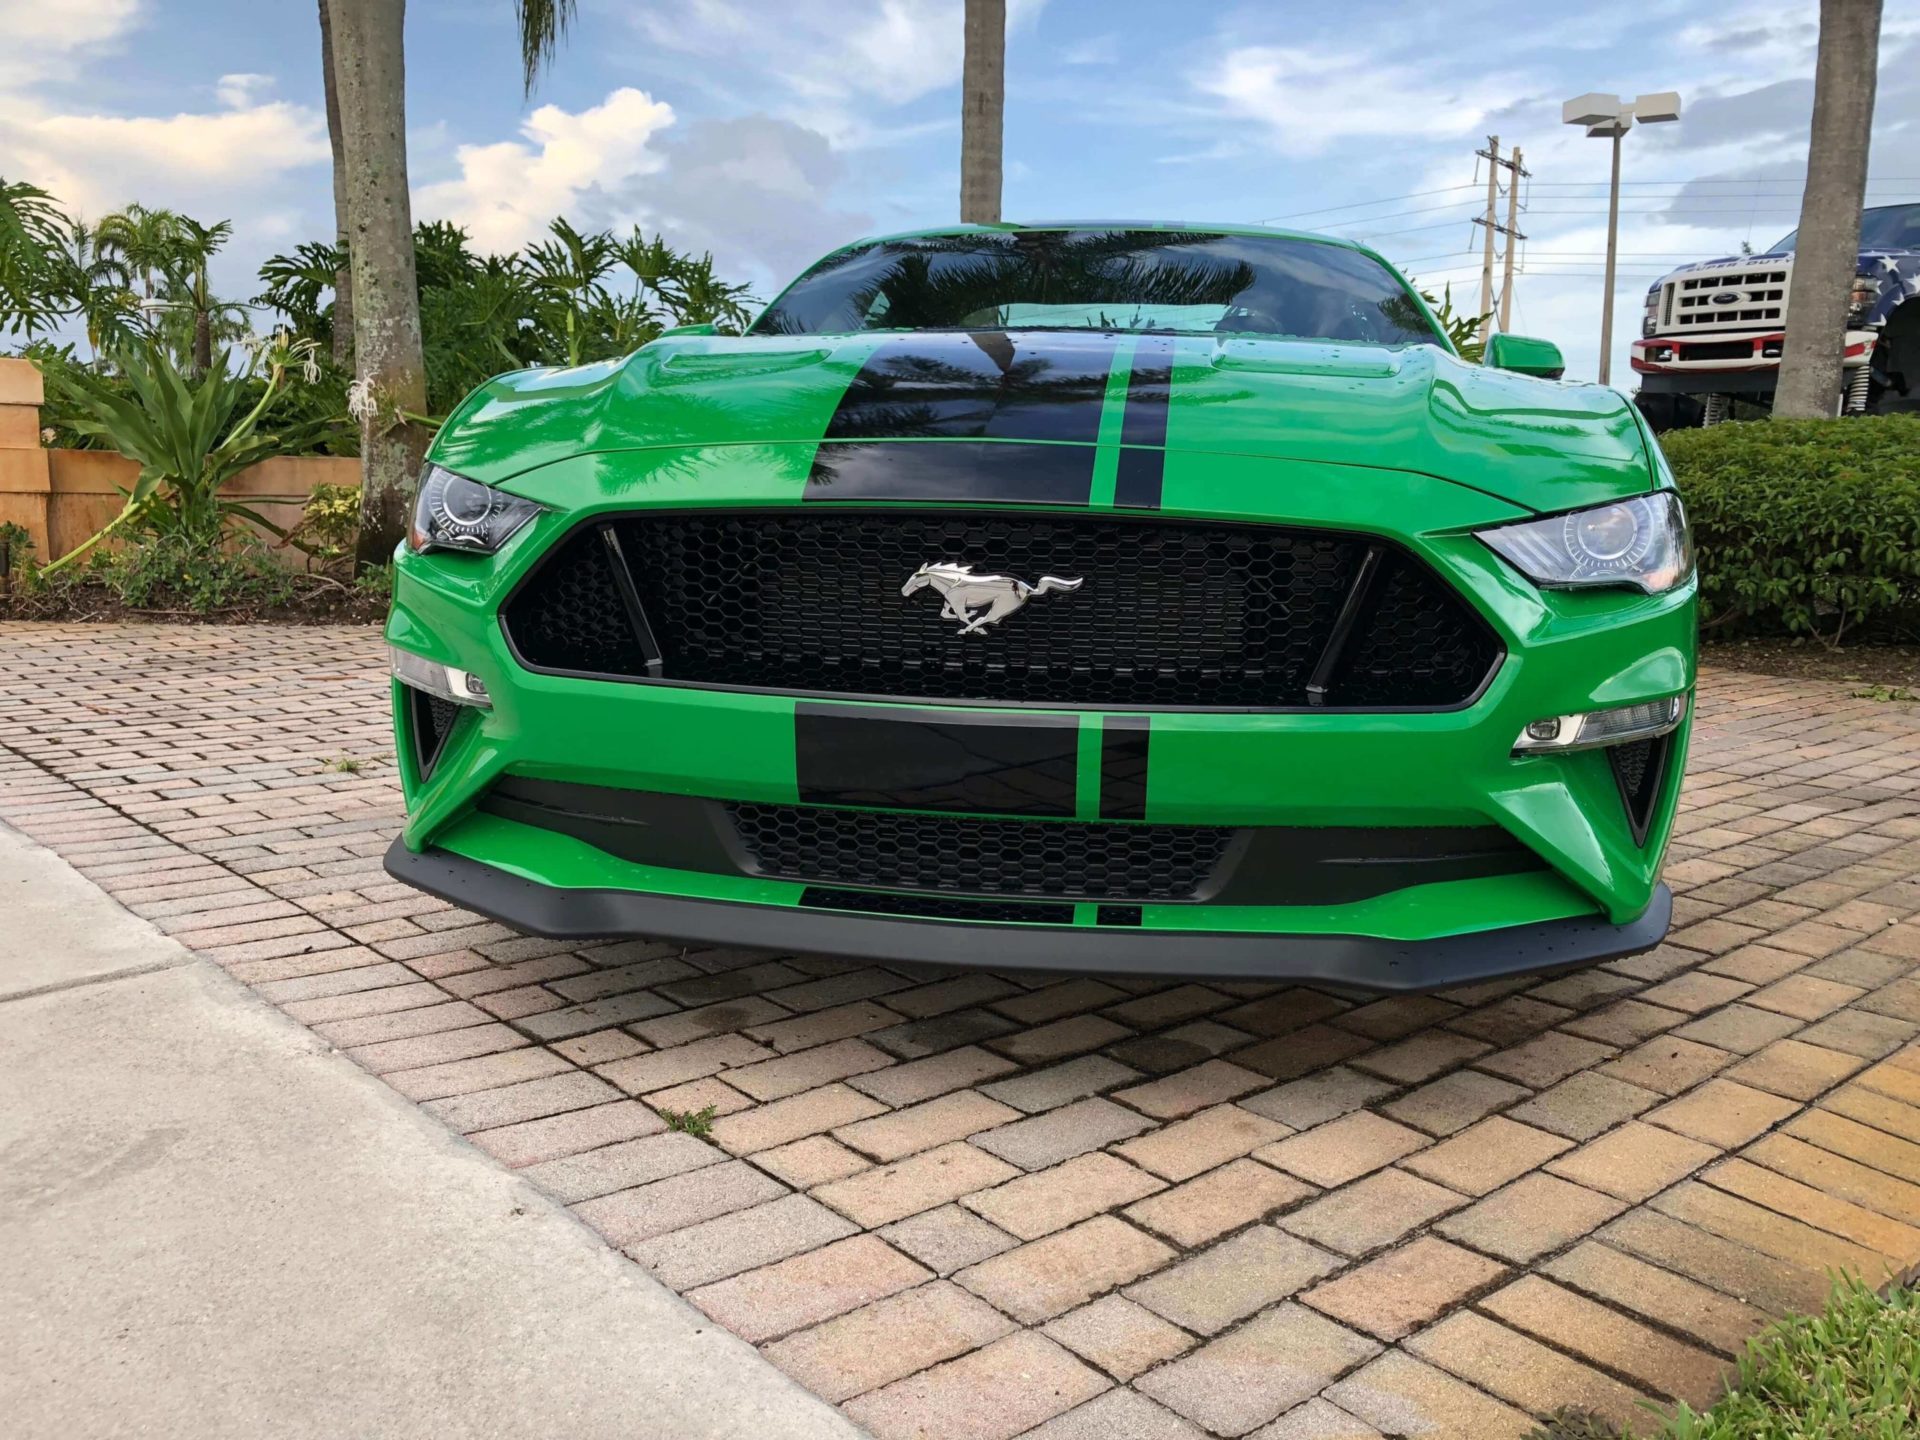 2019 Mustang GT Need for Green